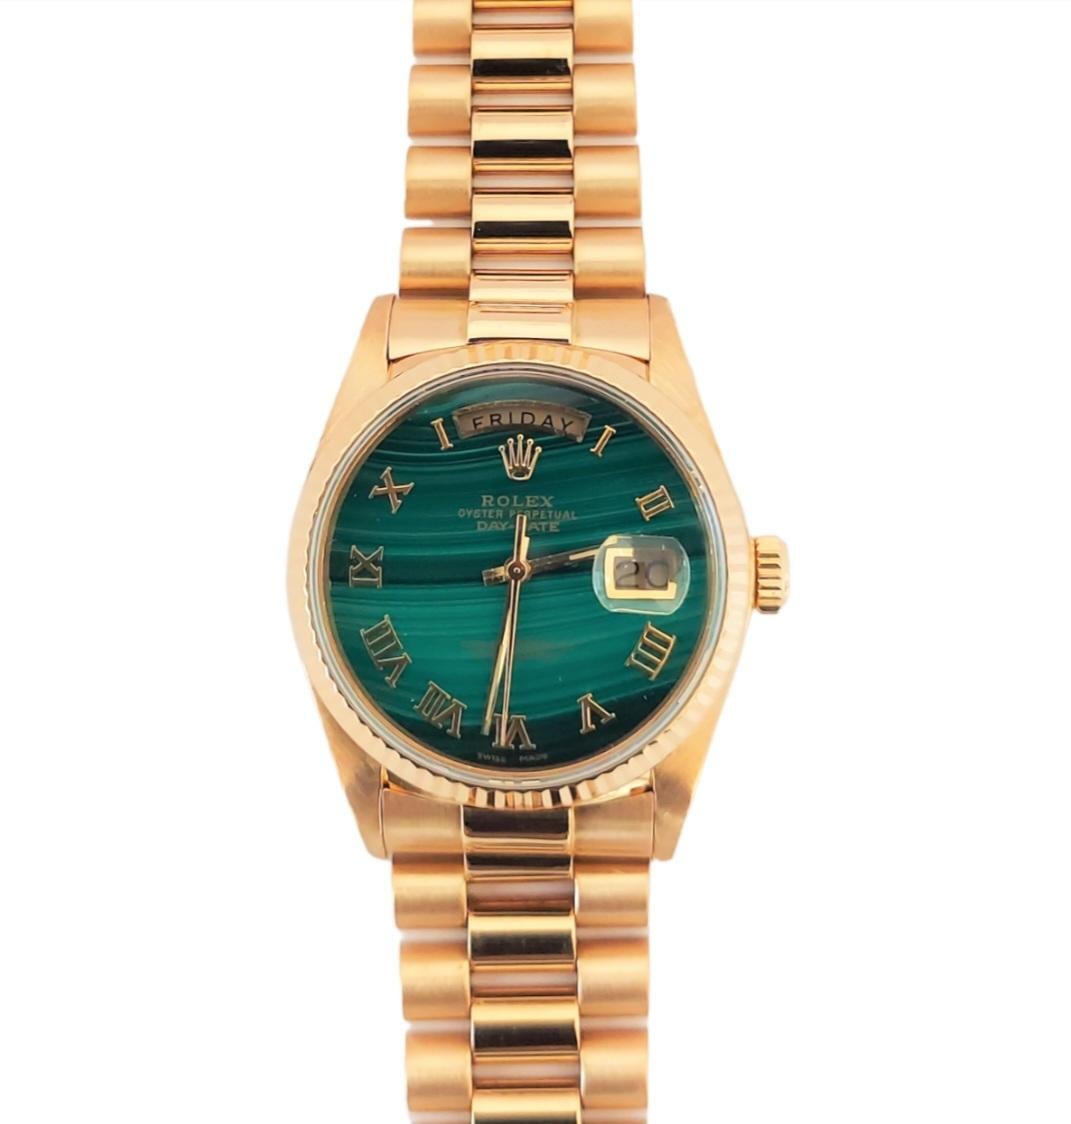 (Watch Description) 
Brand - Rolex
Gender - Mens
Model - 18038 President/Day-DATE
Metals - Yellow solid Gold
Case size - 36mm
Bezel - Yellow gold Fluted
Crystal - Sapphire
Movement - Automatic Cal.3055
Dial - Black stick 
Wrist band - Yellow solid